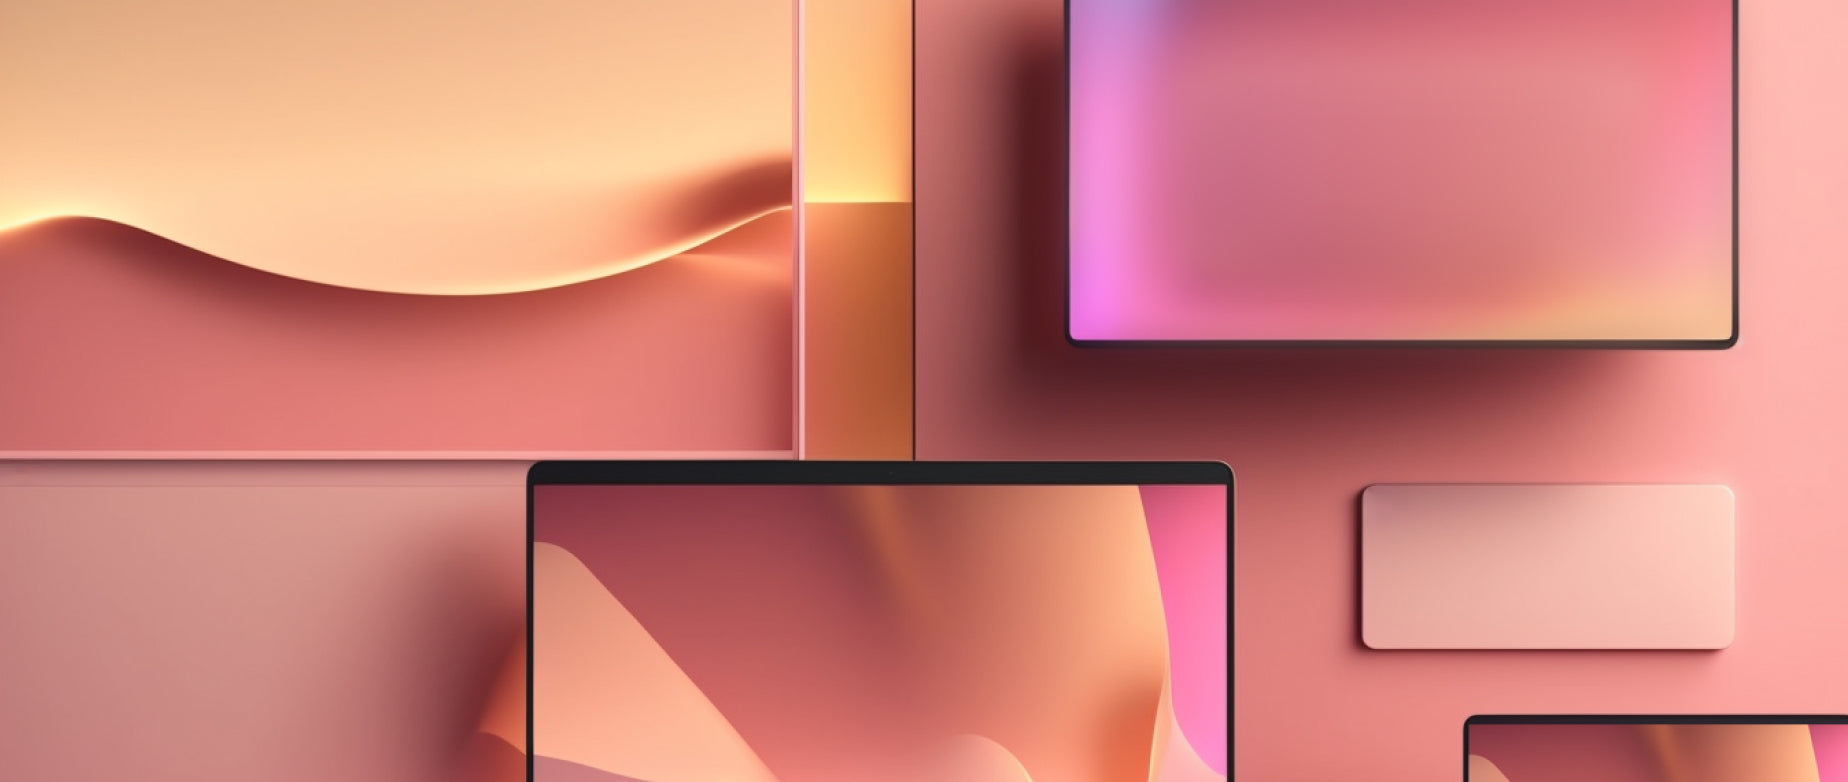 Desktop, laptop, tablet, and phone screens display a continuous abstract pattern.